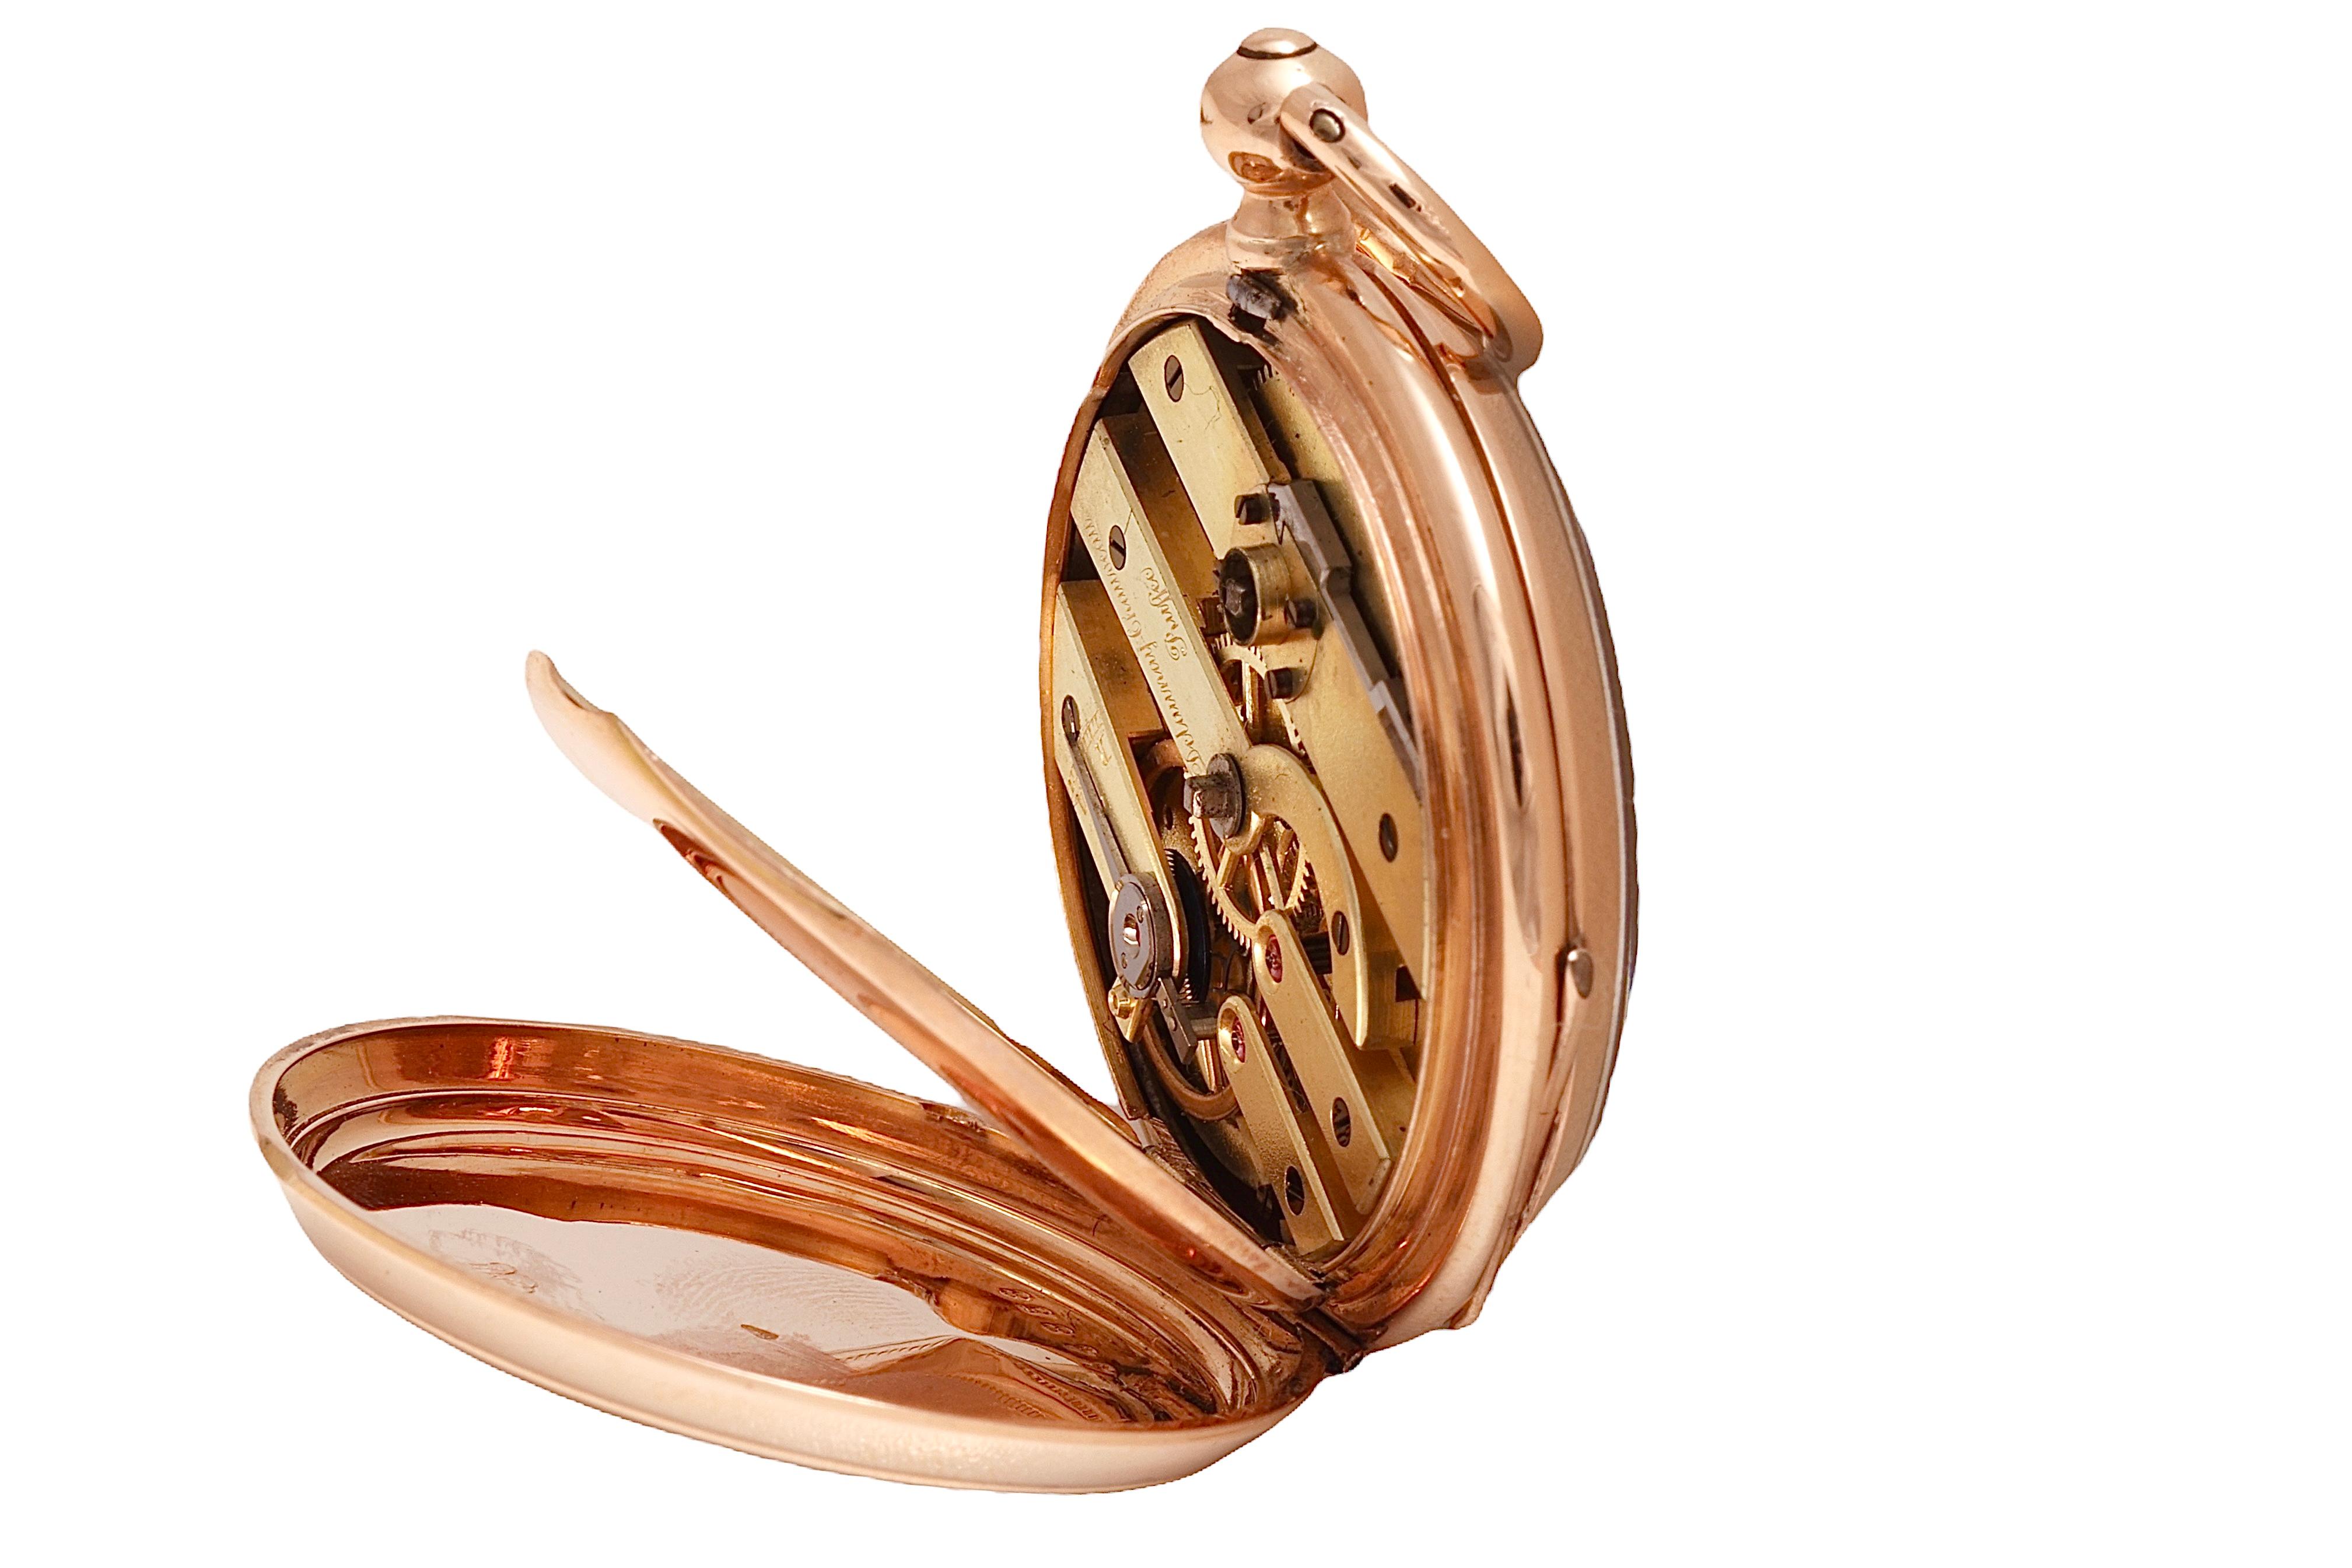 14 Kt Solid Pink Gold Delaunay Chauveau Ruffec pocket watch In Excellent Condition For Sale In Antwerp, BE